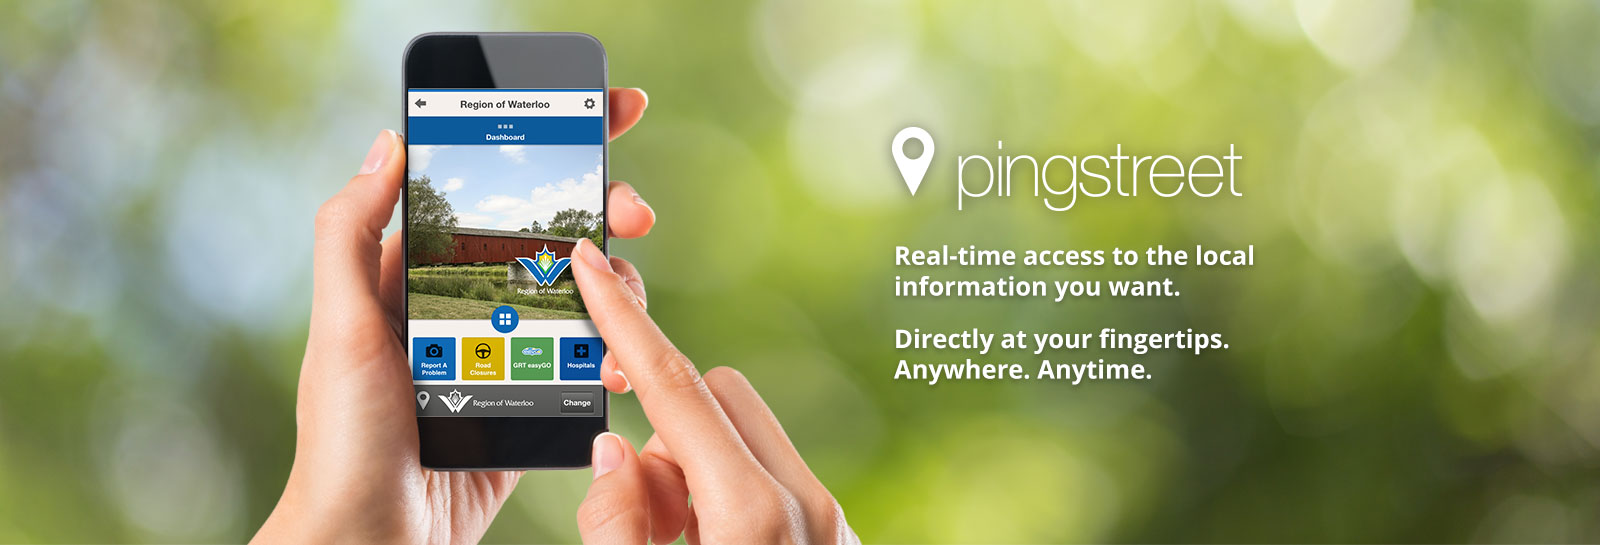 Pingstreet Mobile App: Real-time access to the local information you want.